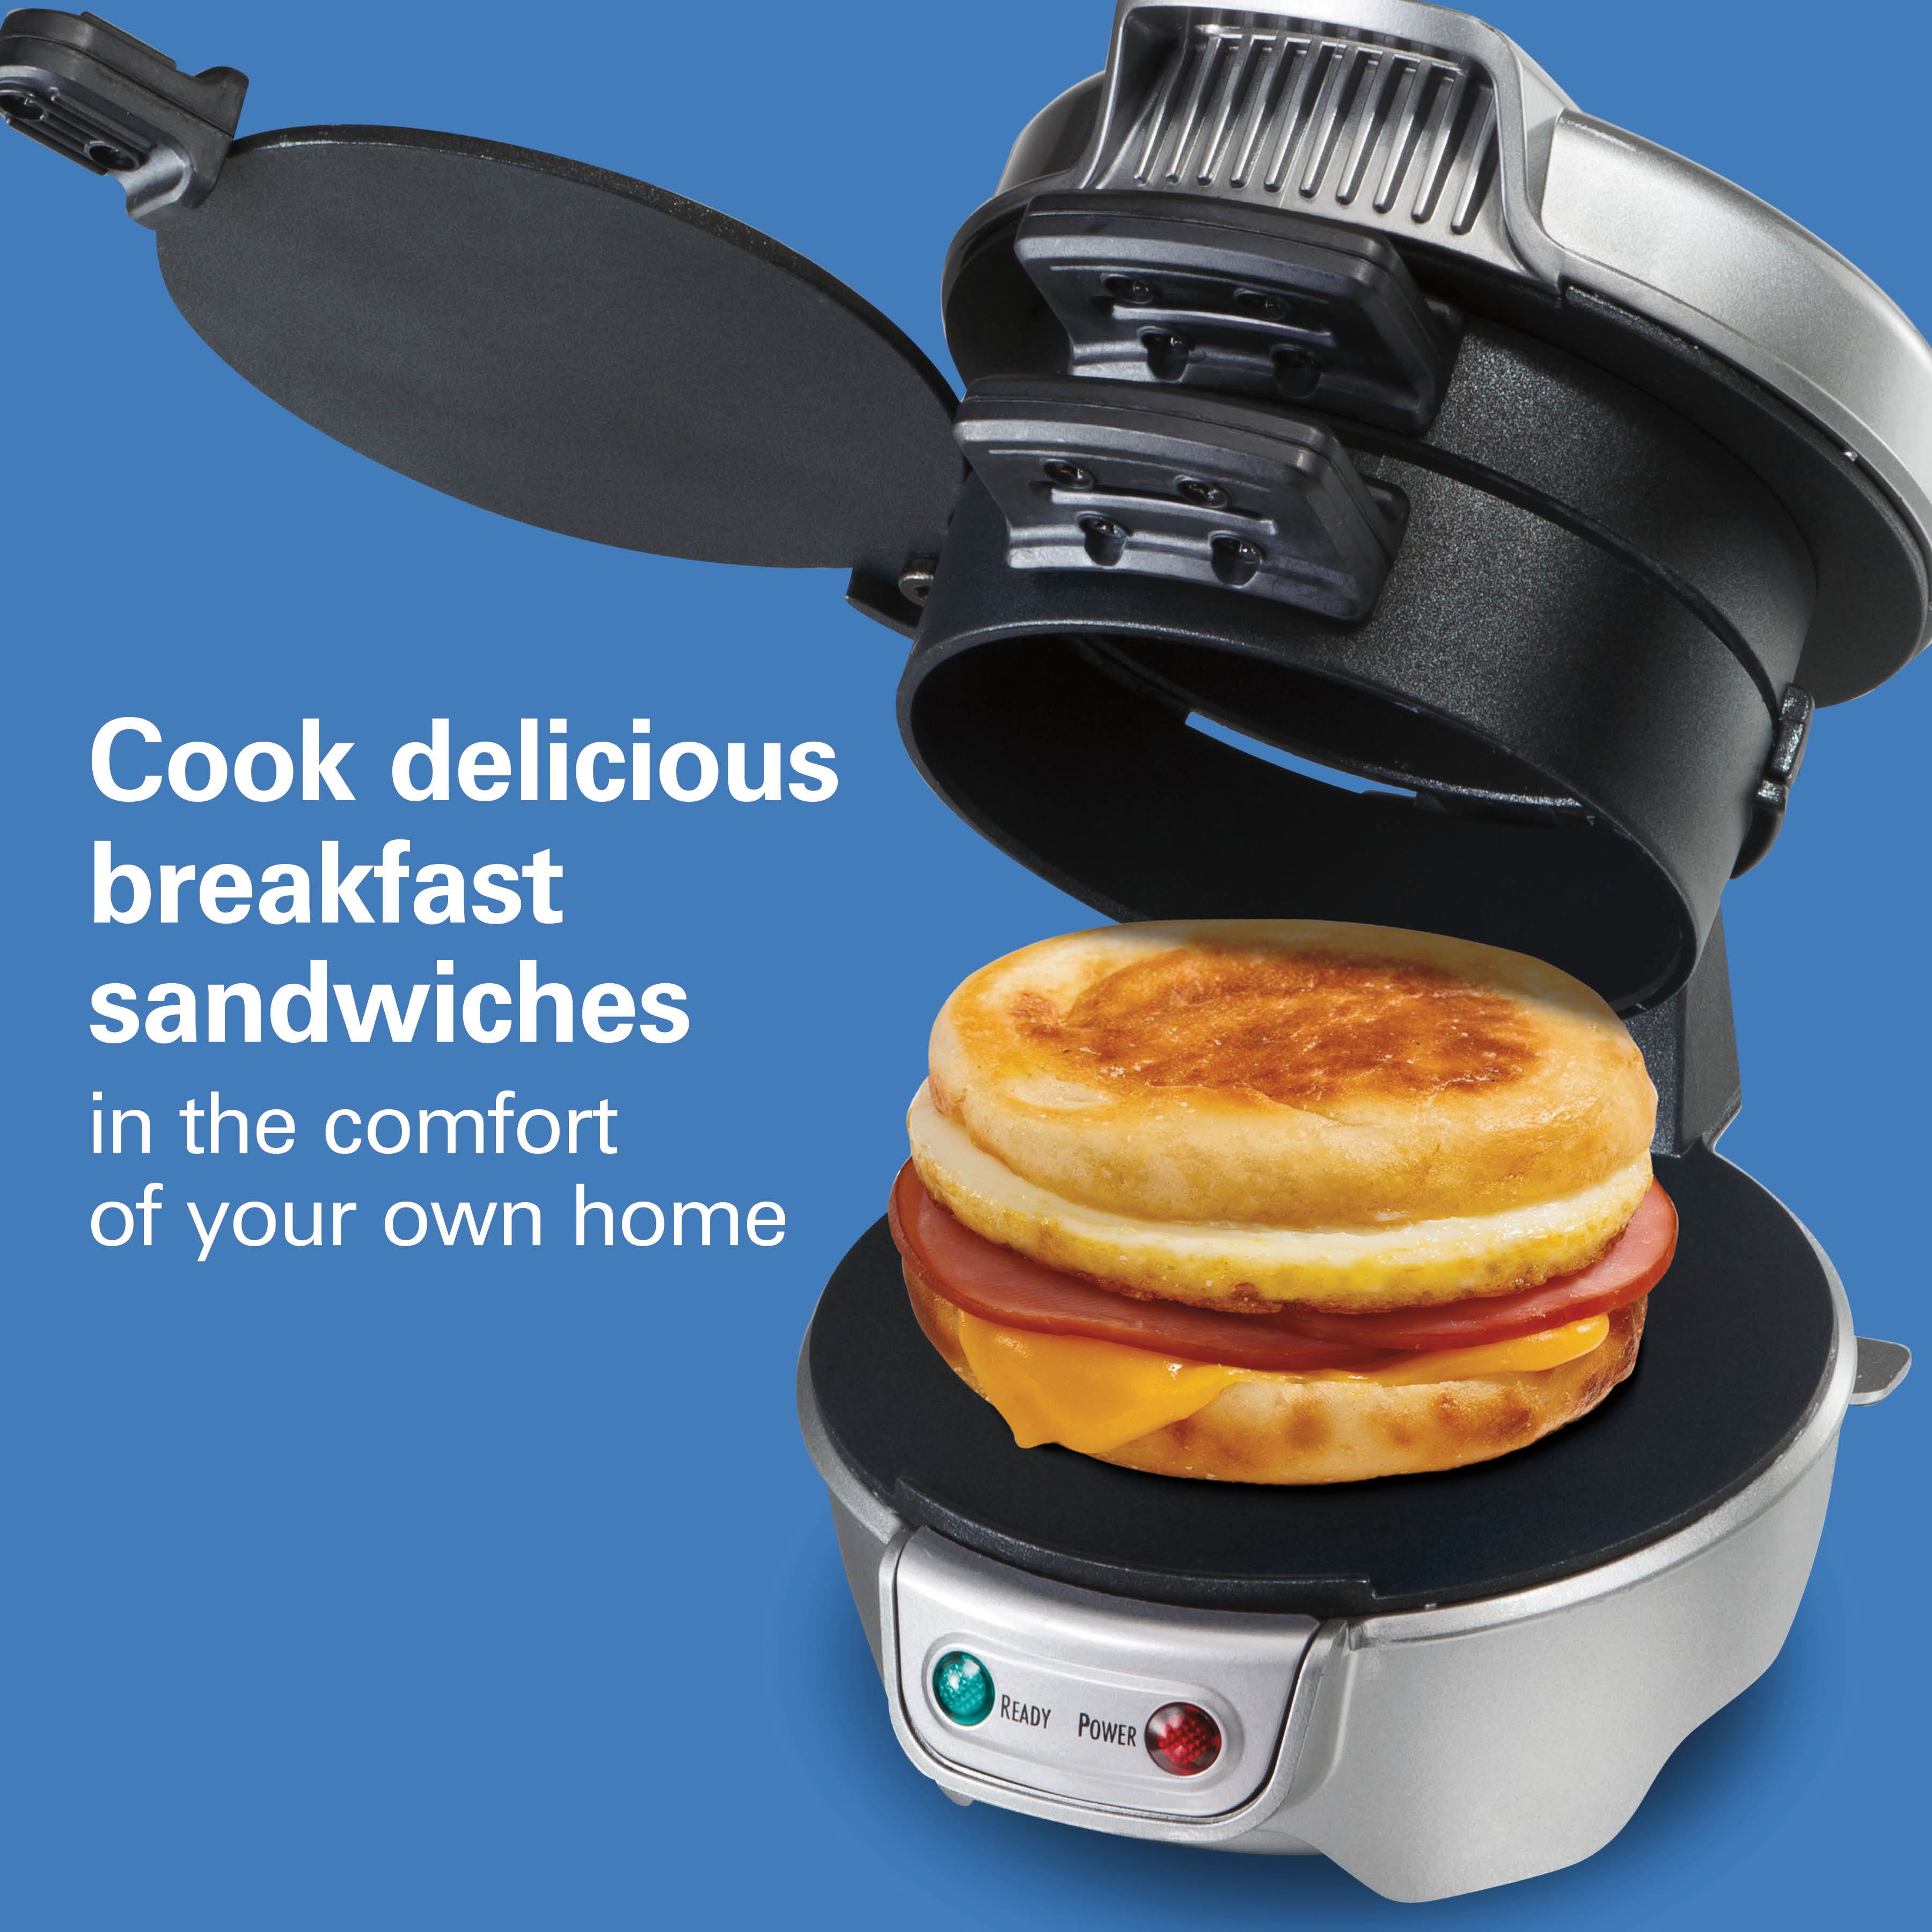 Hamilton Beach Breakfast Sandwich Maker with Egg Cooker Ring, Customize Ingredients, Silver, 25475 - image 4 of 9